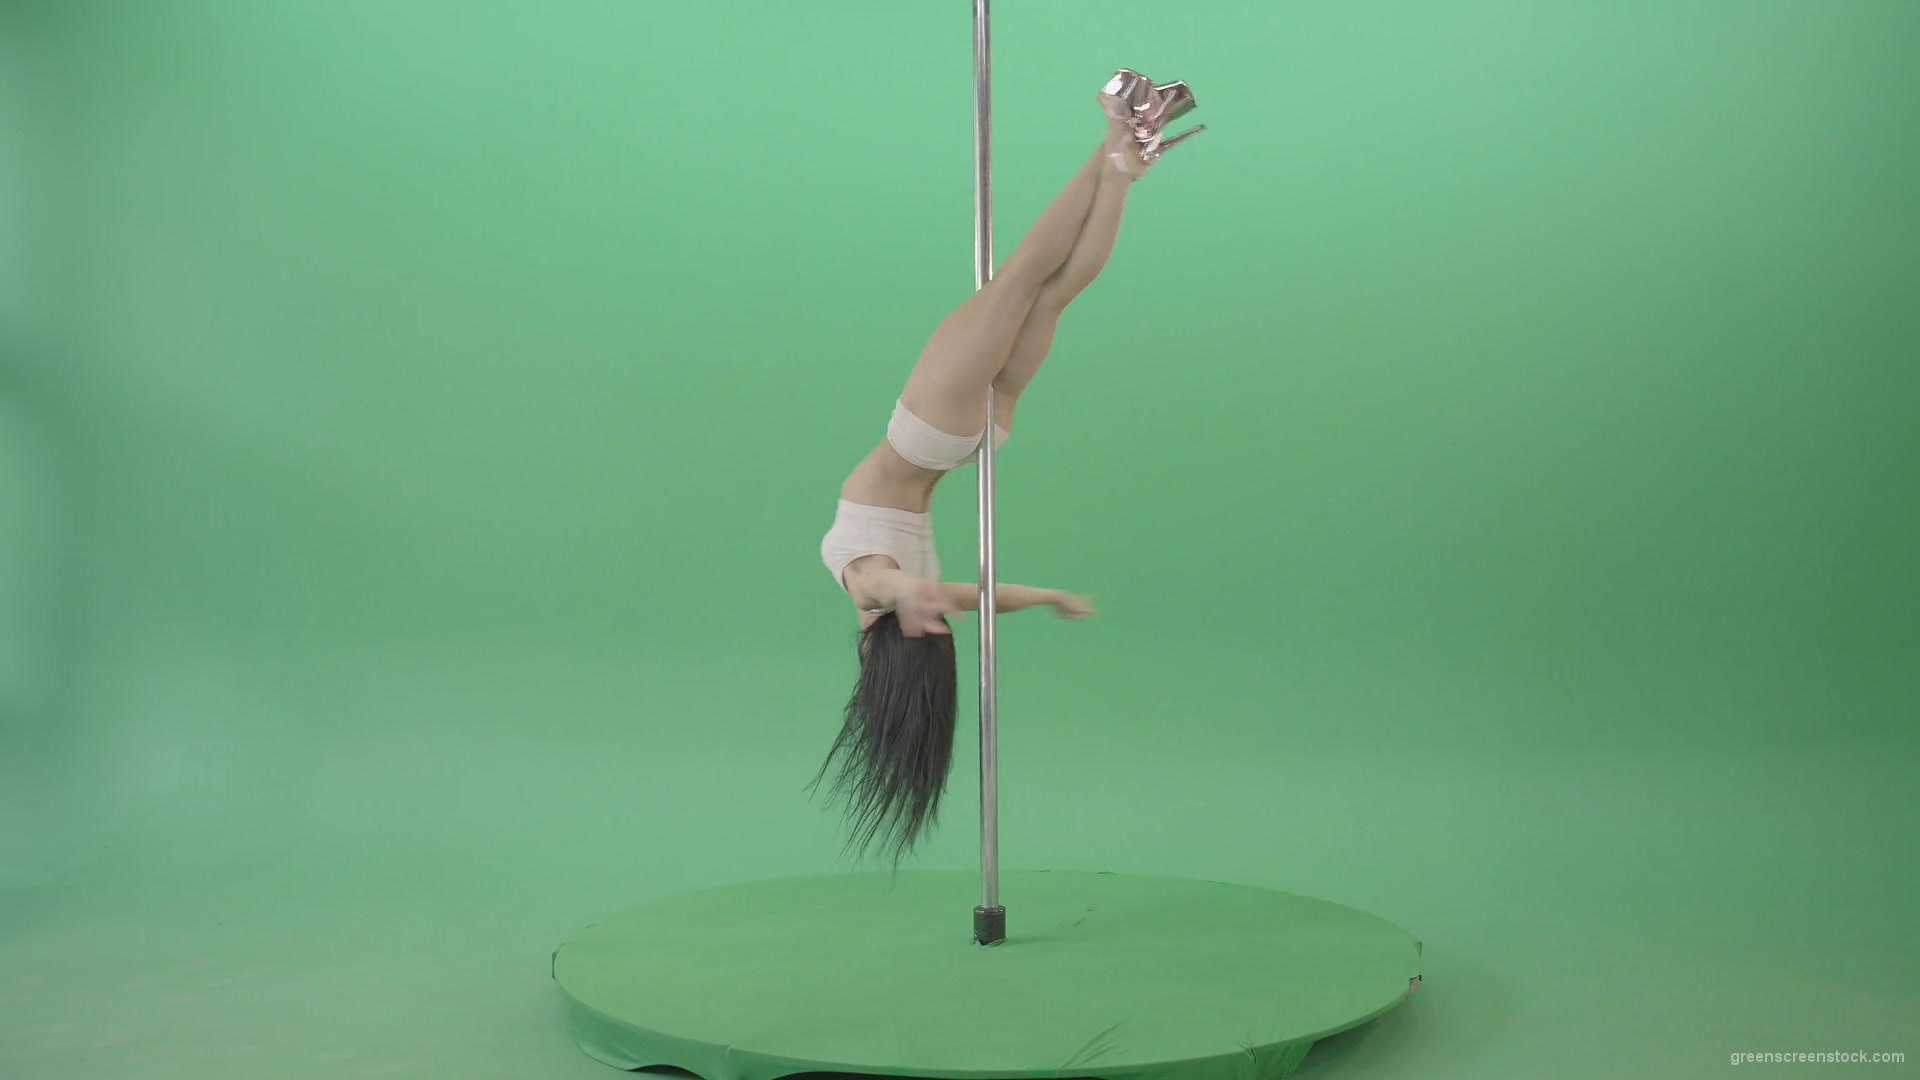 White-dressed-Girl-spinning-down-head-on-pole-dance-on-green-screen-4K-Video-Footage-1920_006 Green Screen Stock